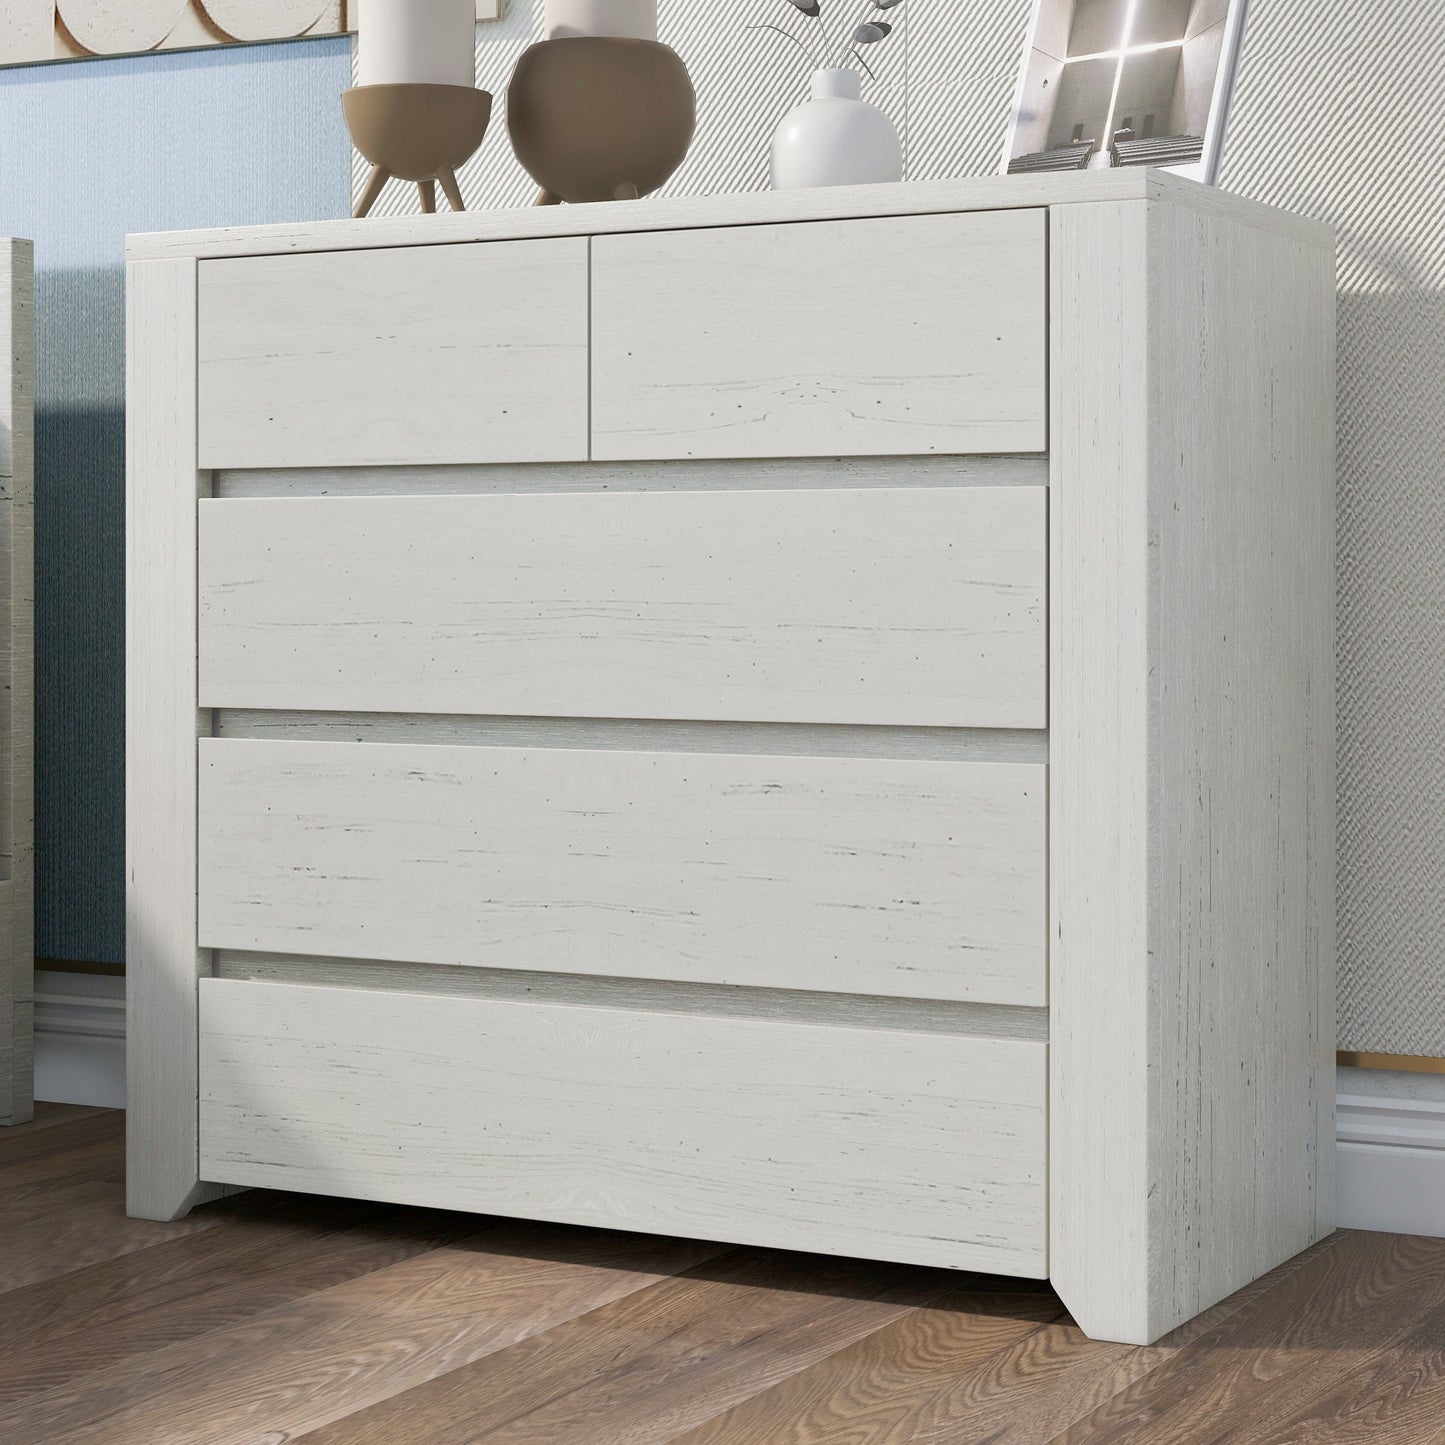 3 Pieces Off White Simple Style Manufacture Wood Bedroom Sets with Twin bed, Nightstand and Chest